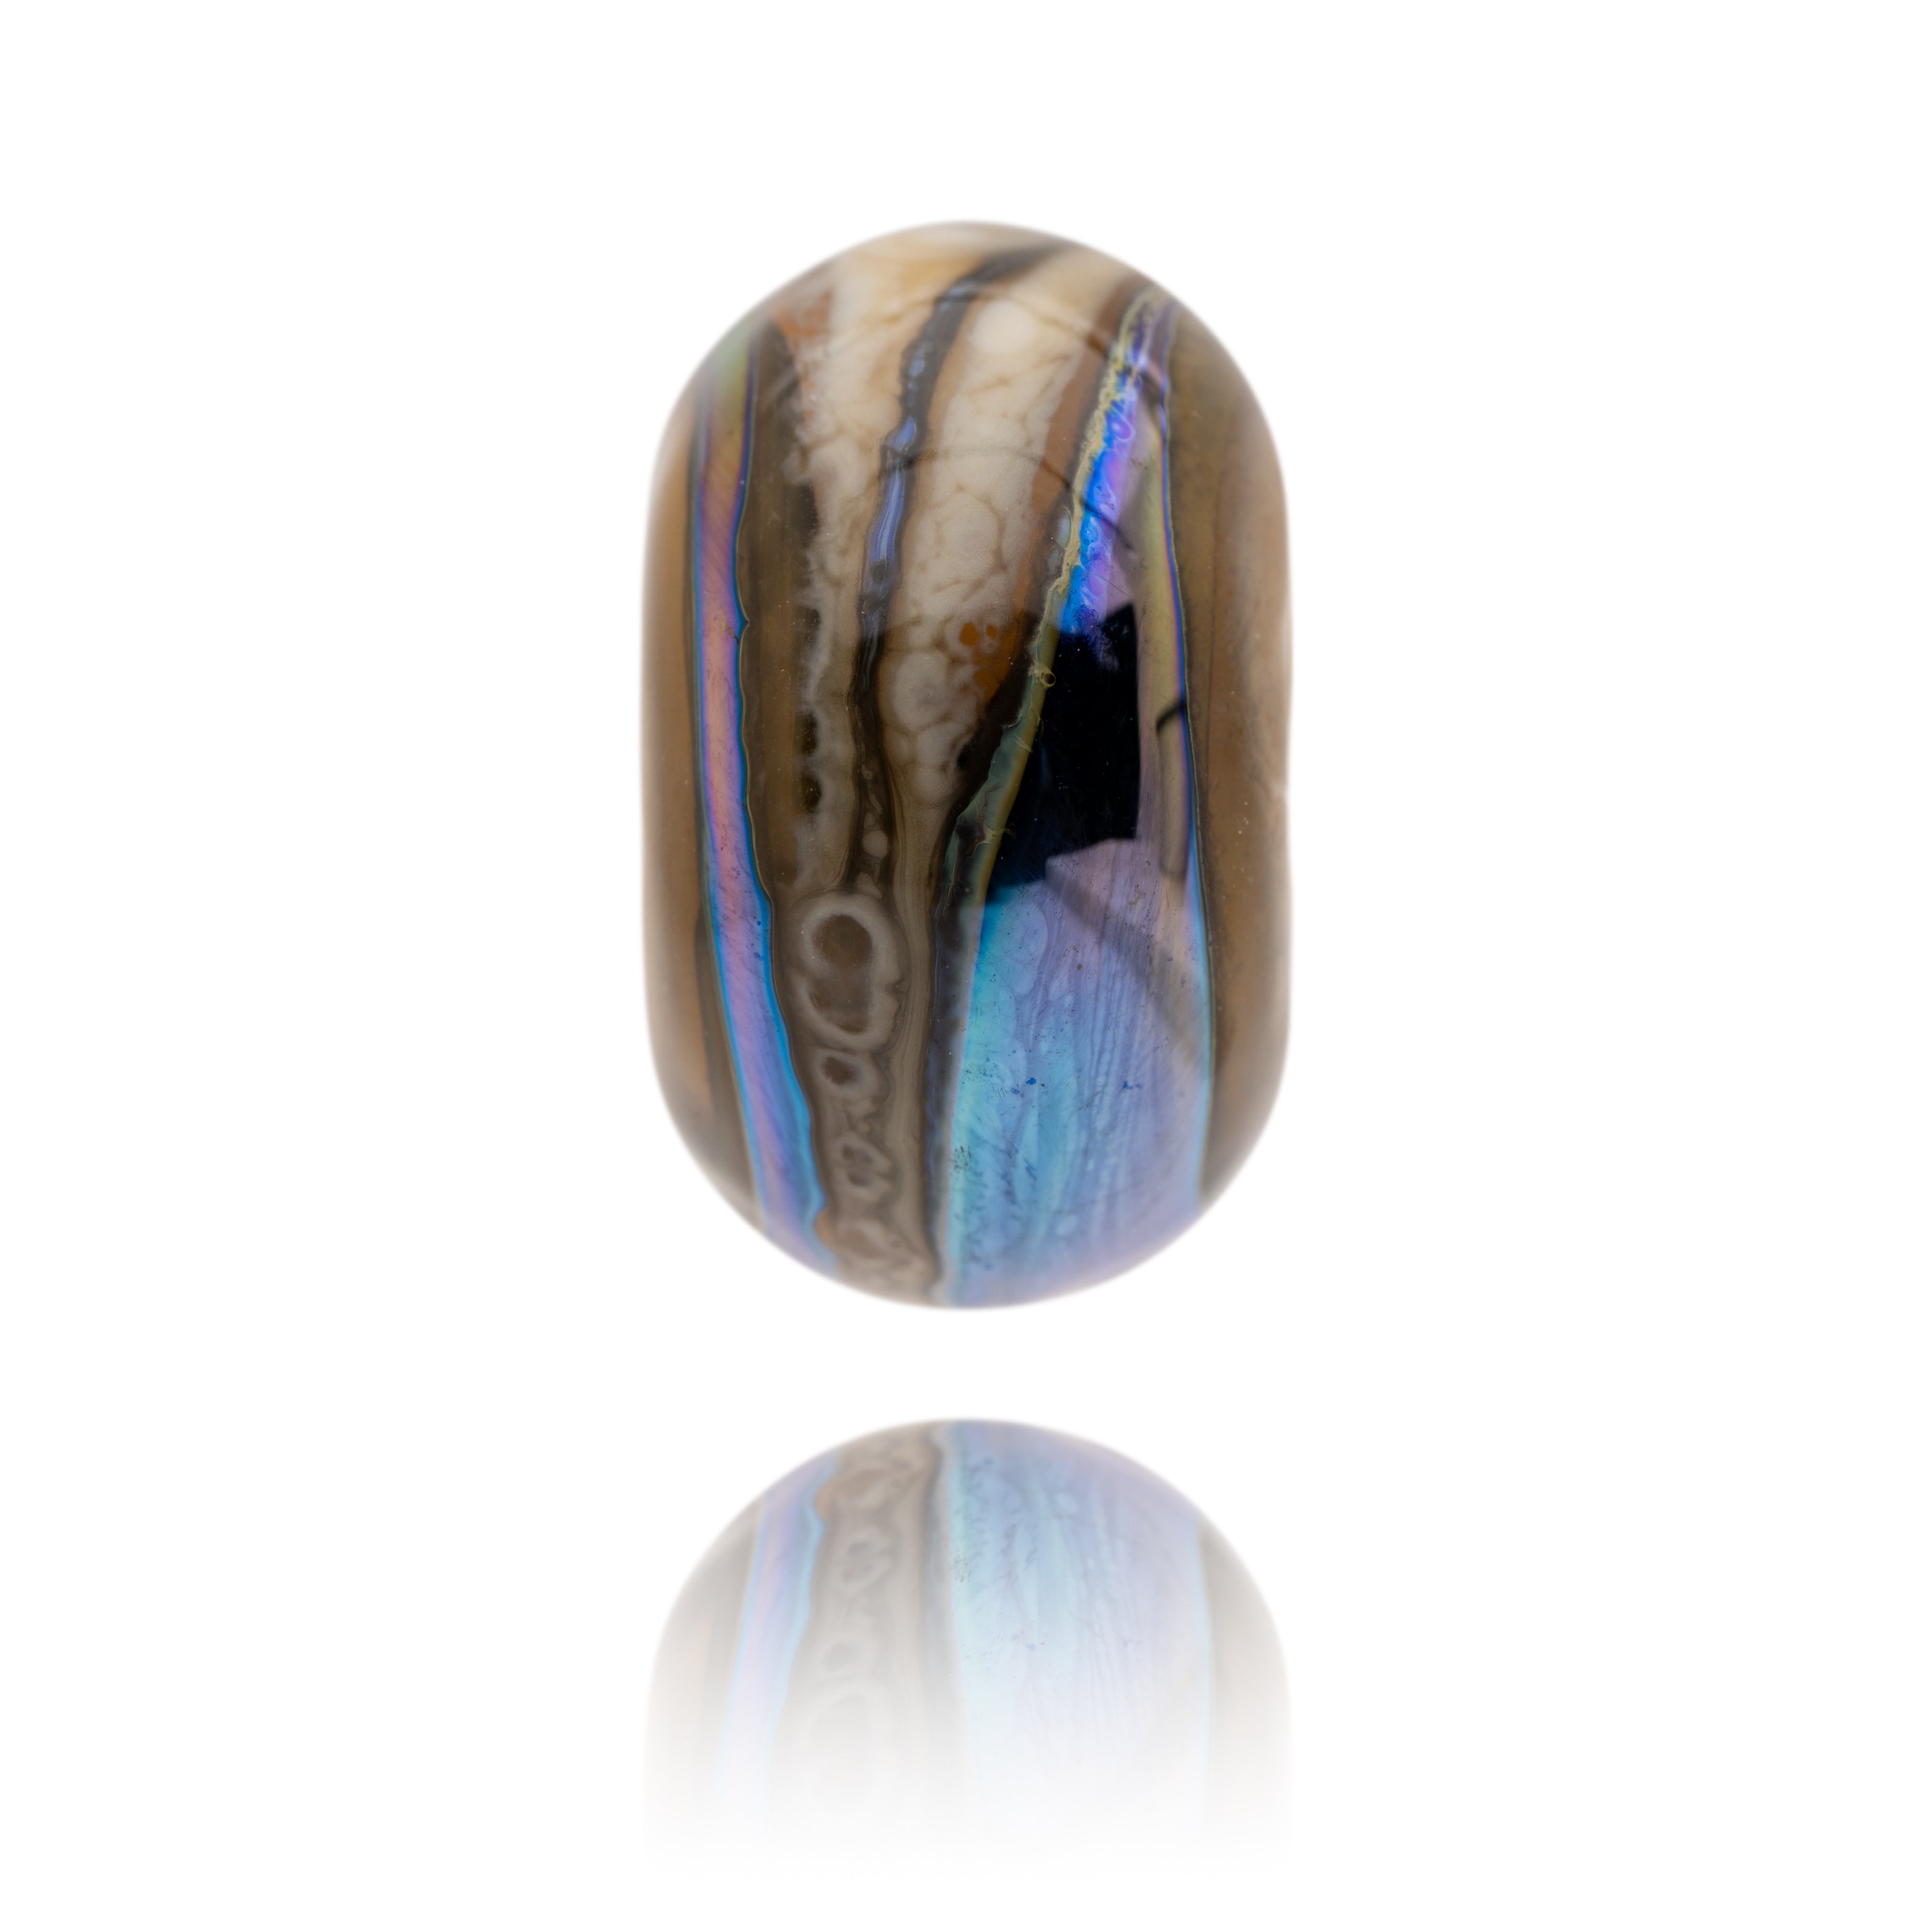 Ivory and blue swirling glass bead representing Longsands Beach in Tynemouth.